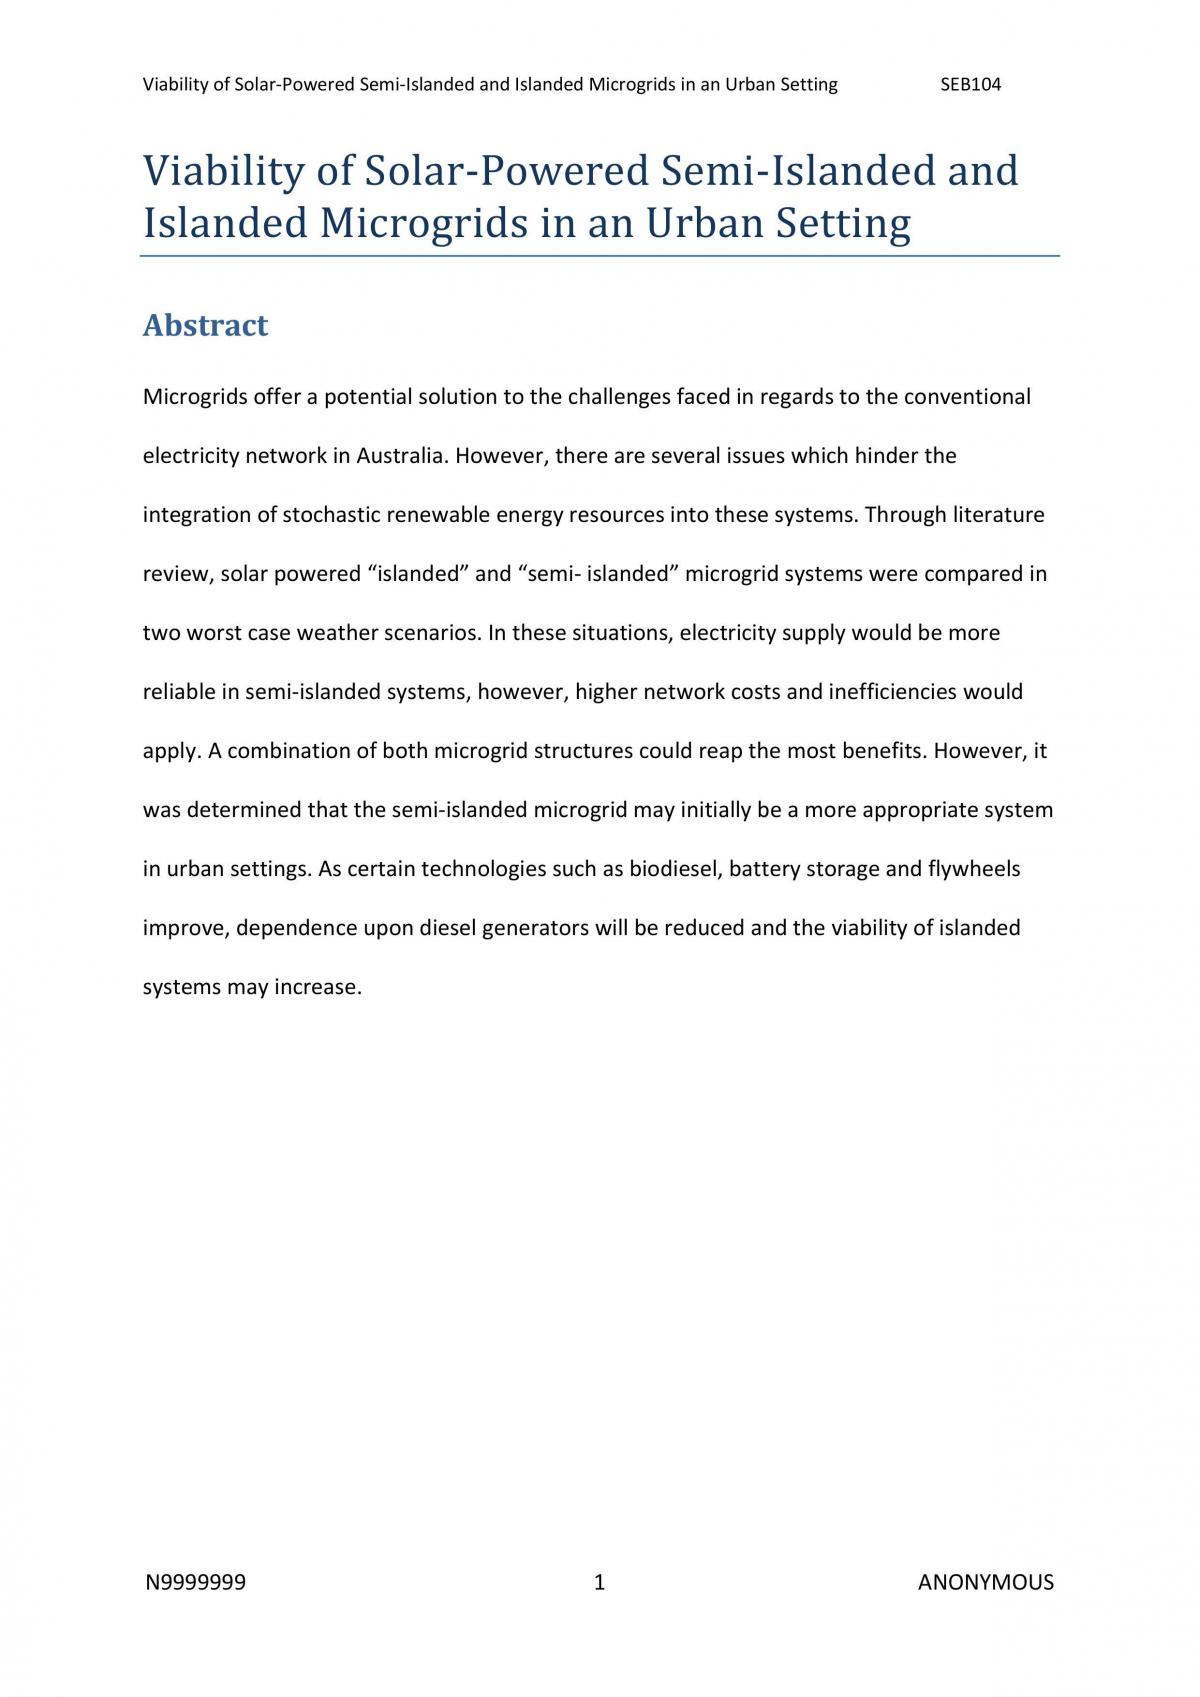 Viability of Solar-Powered Semi-Islanded and Islanded Microgrids in an Urban Setting Essay - Page 1